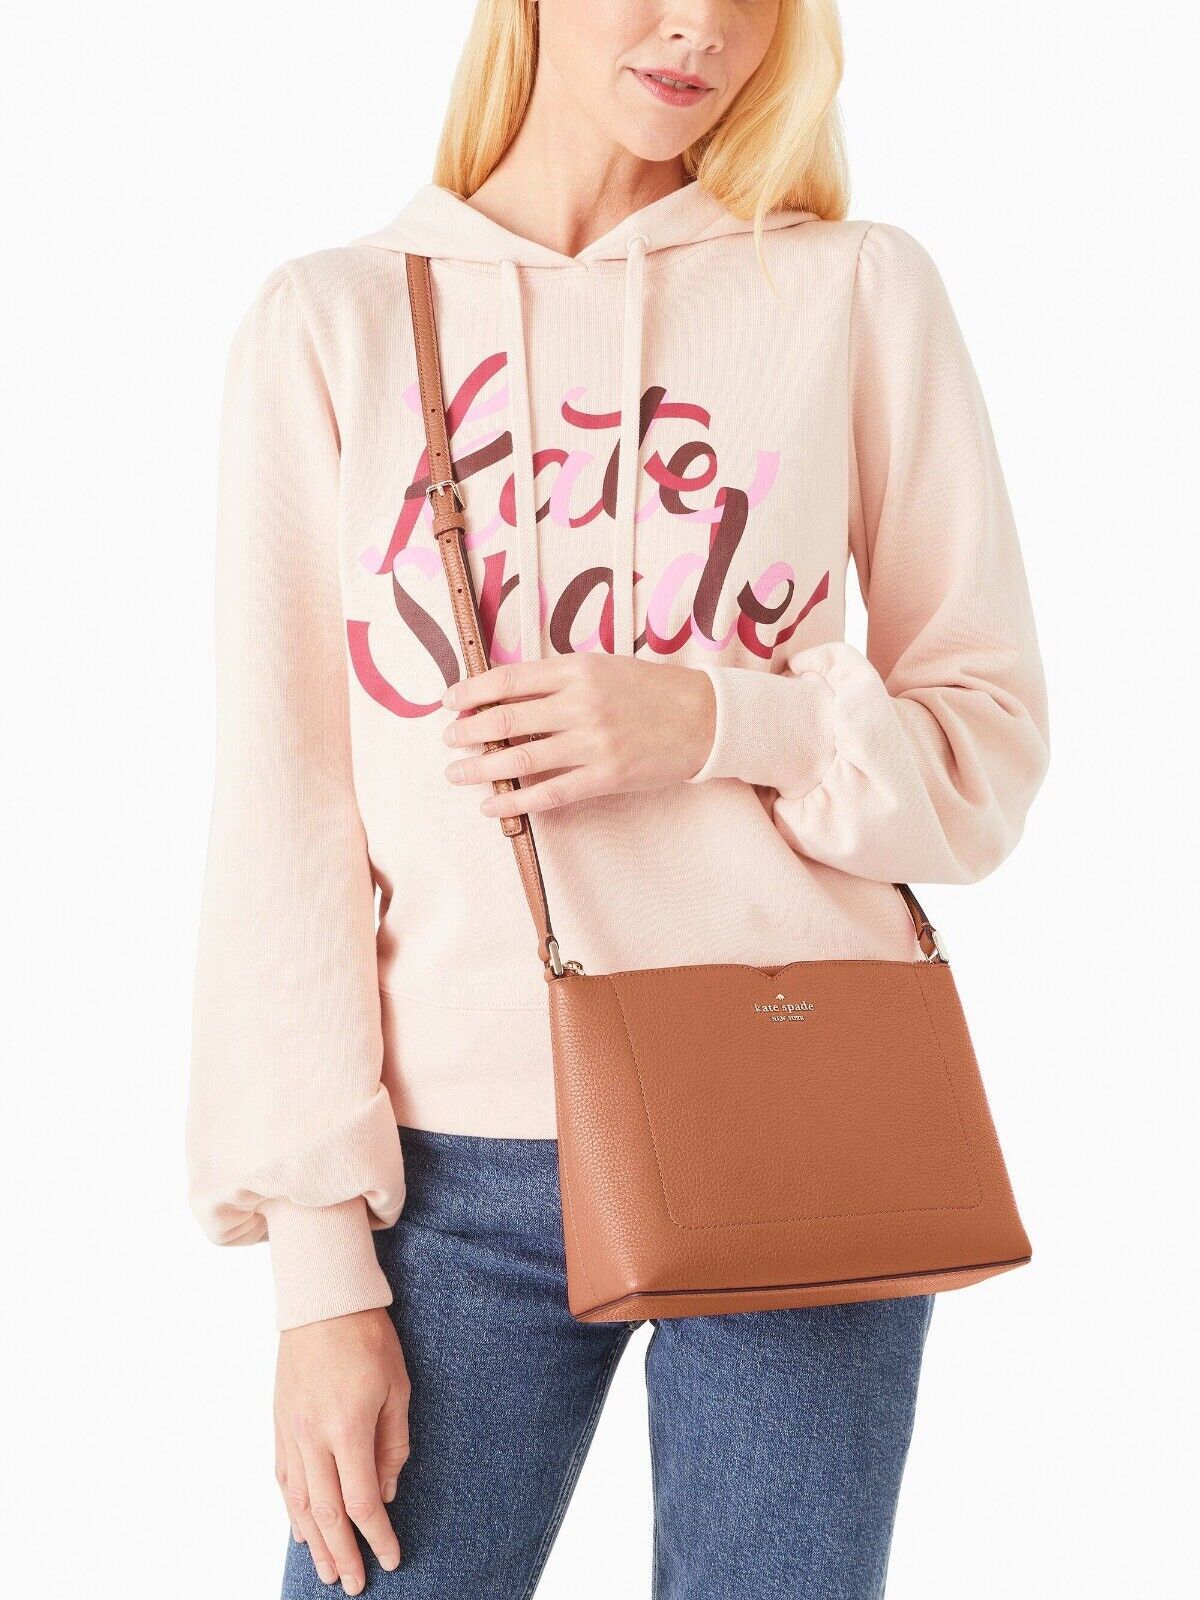  Kate Spade New York Love Shack Small Reversible Tote Bag :  Clothing, Shoes & Jewelry